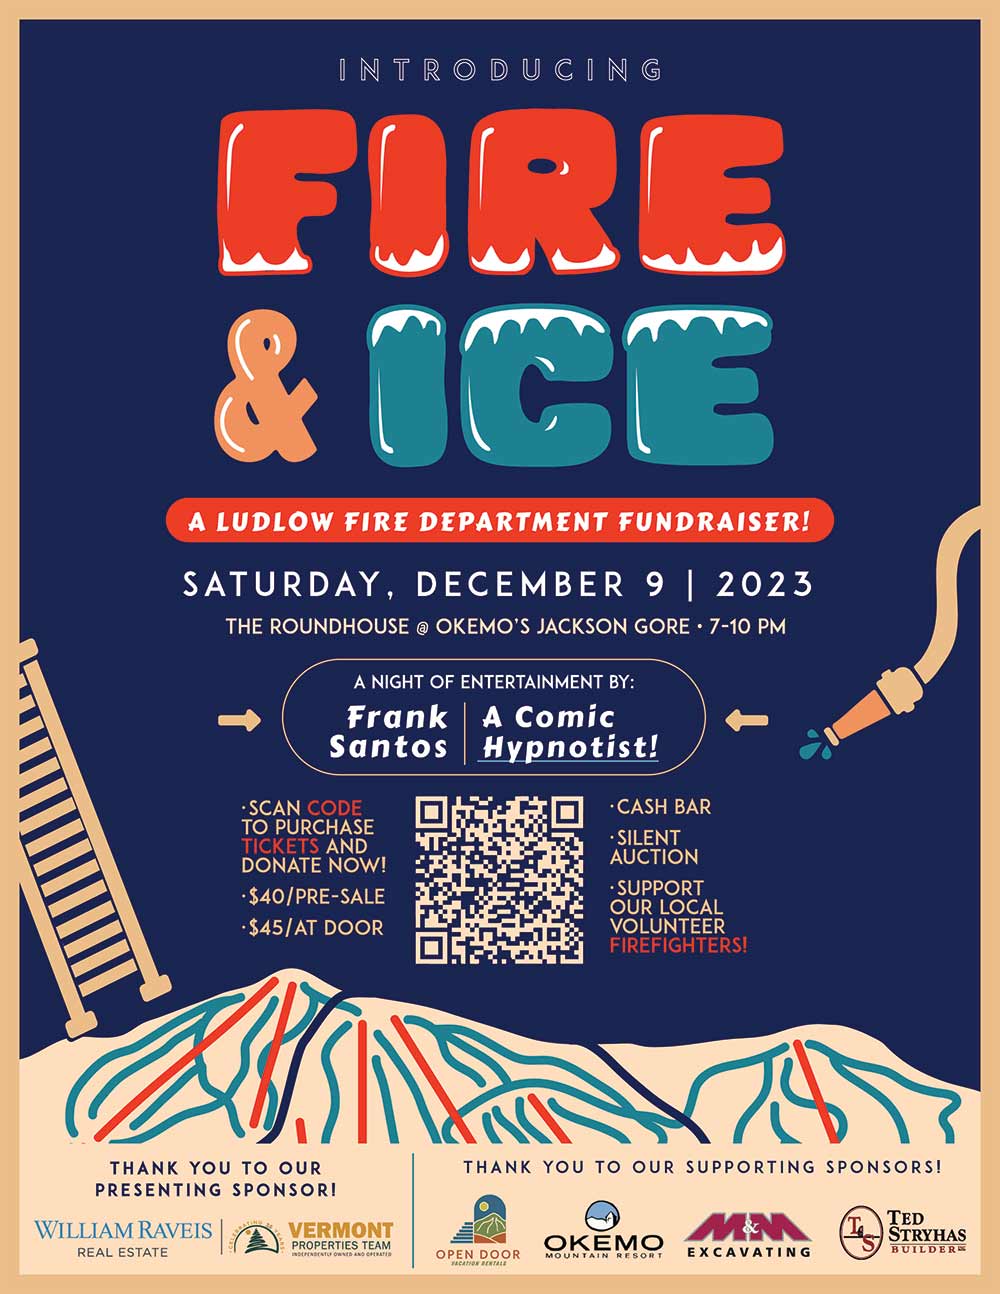 "Fire & Ice" fundraiser for the Ludlow, Vermont Fire Department